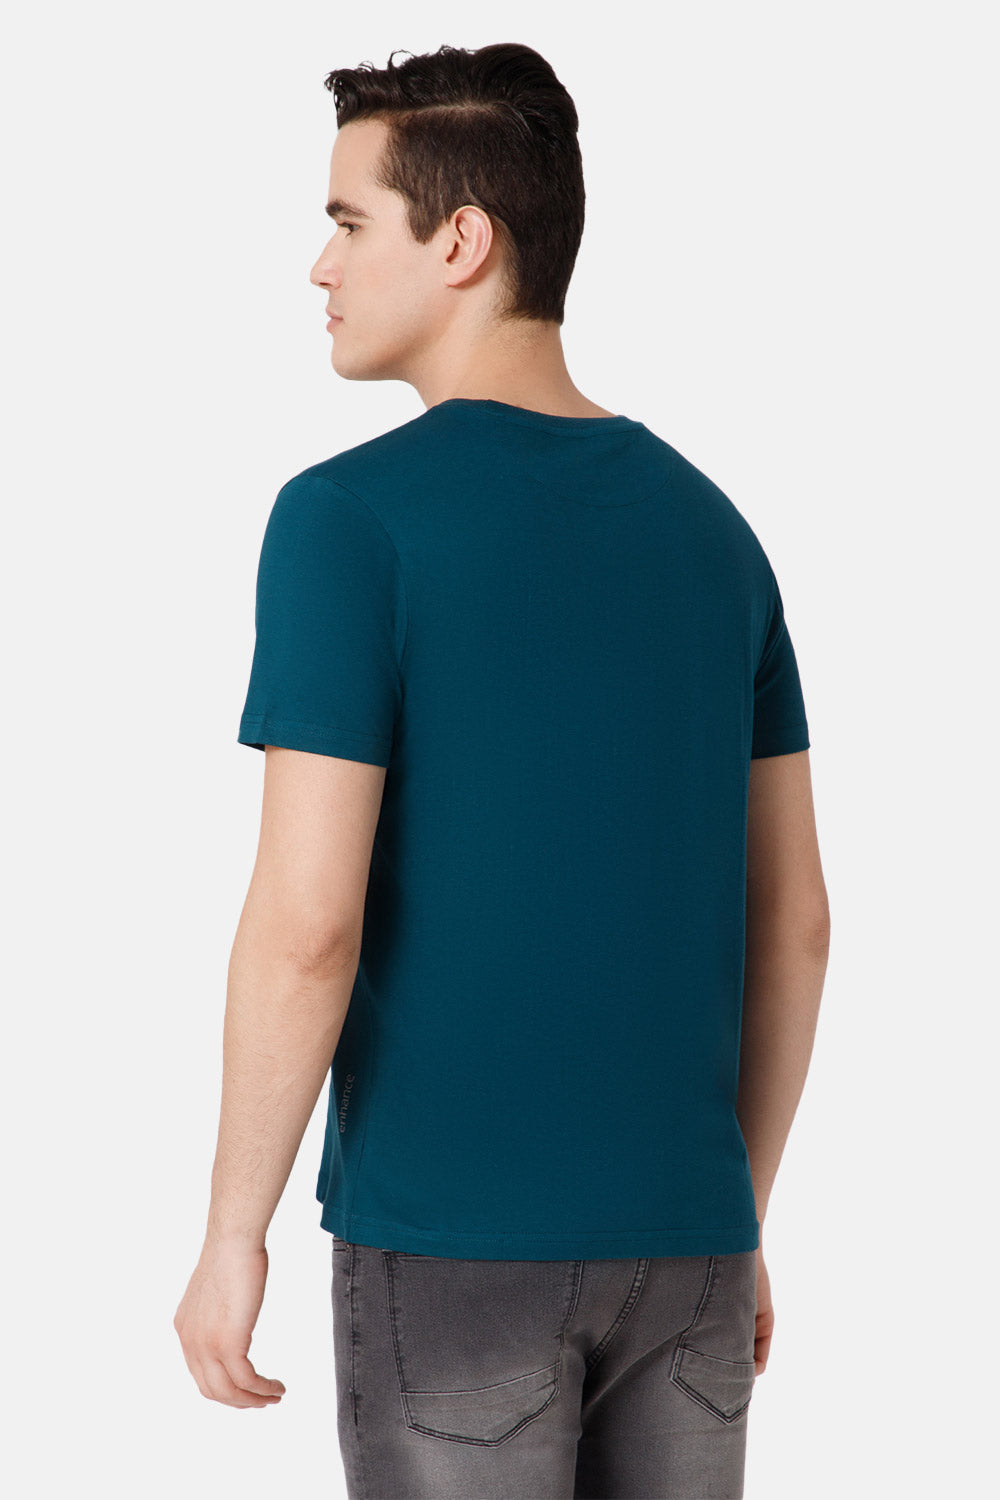 Enhance Printed Crew Neck Men's Casual T-Shirts - Teal - TS09